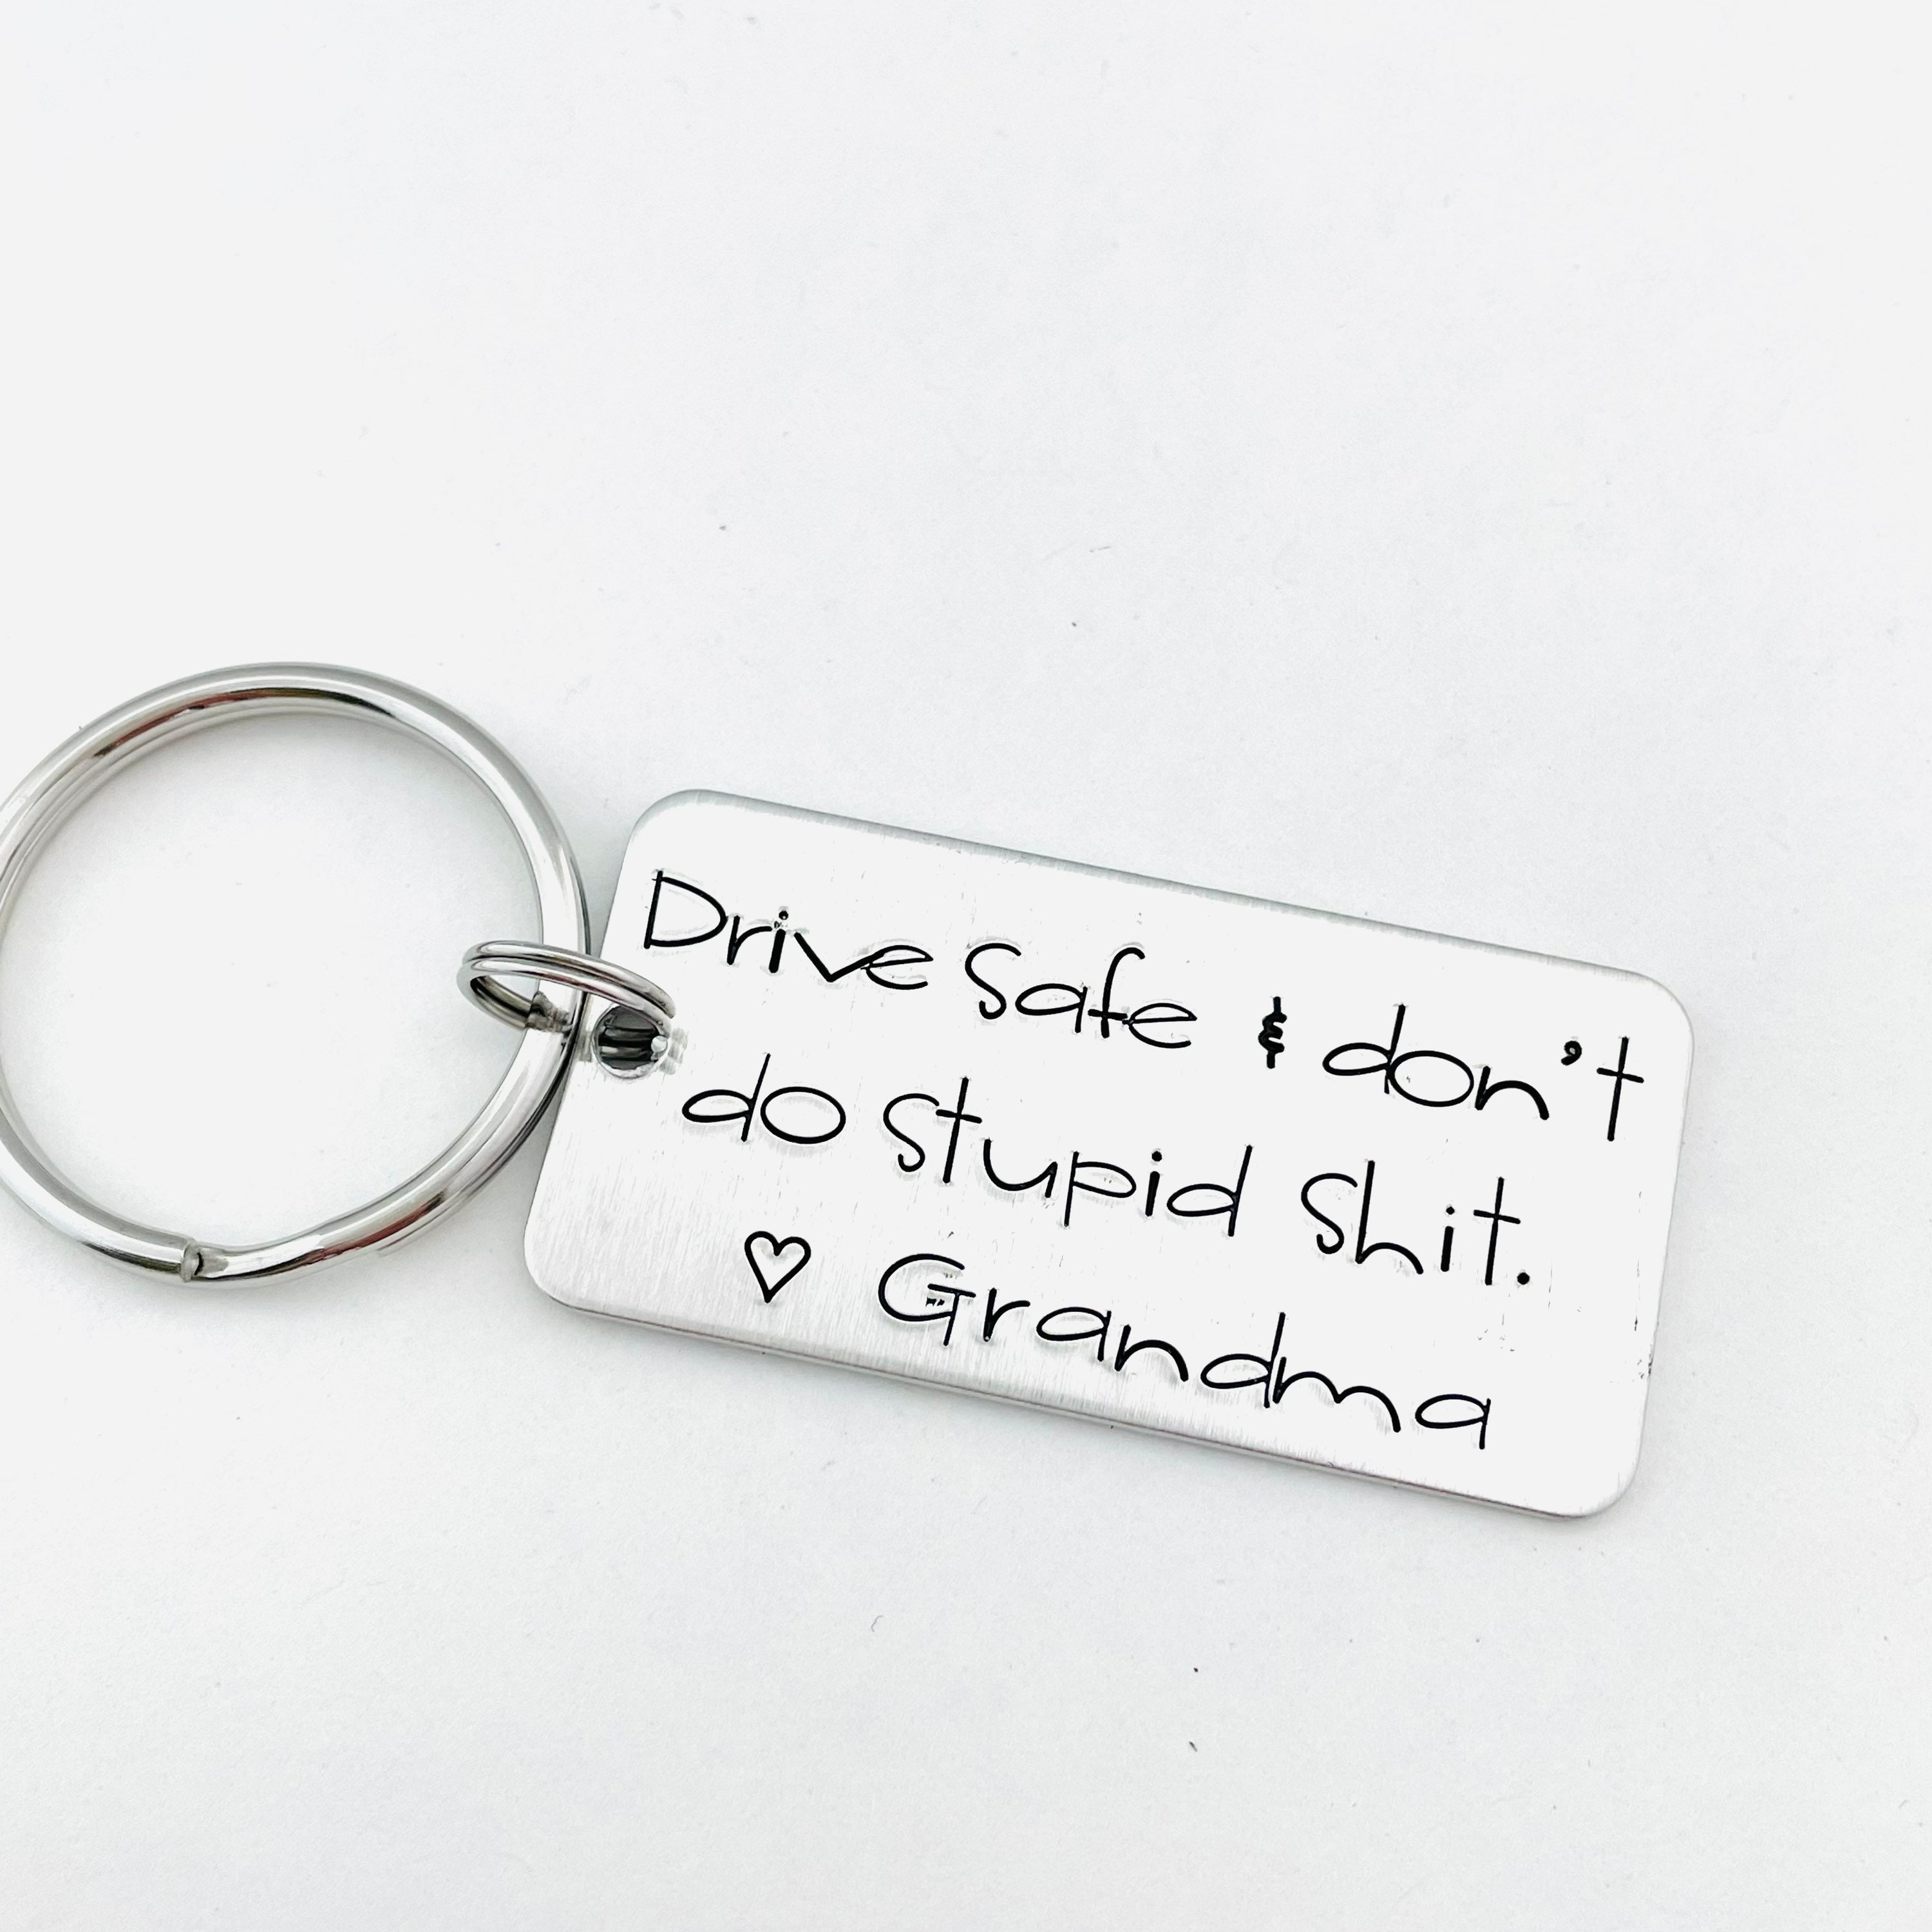 Don't do stupid shit, love (your name here) , keychain, from mom gift, teen  gift, drive safe, be careful, be safe, safe, ride safe, stay safe – SM Made